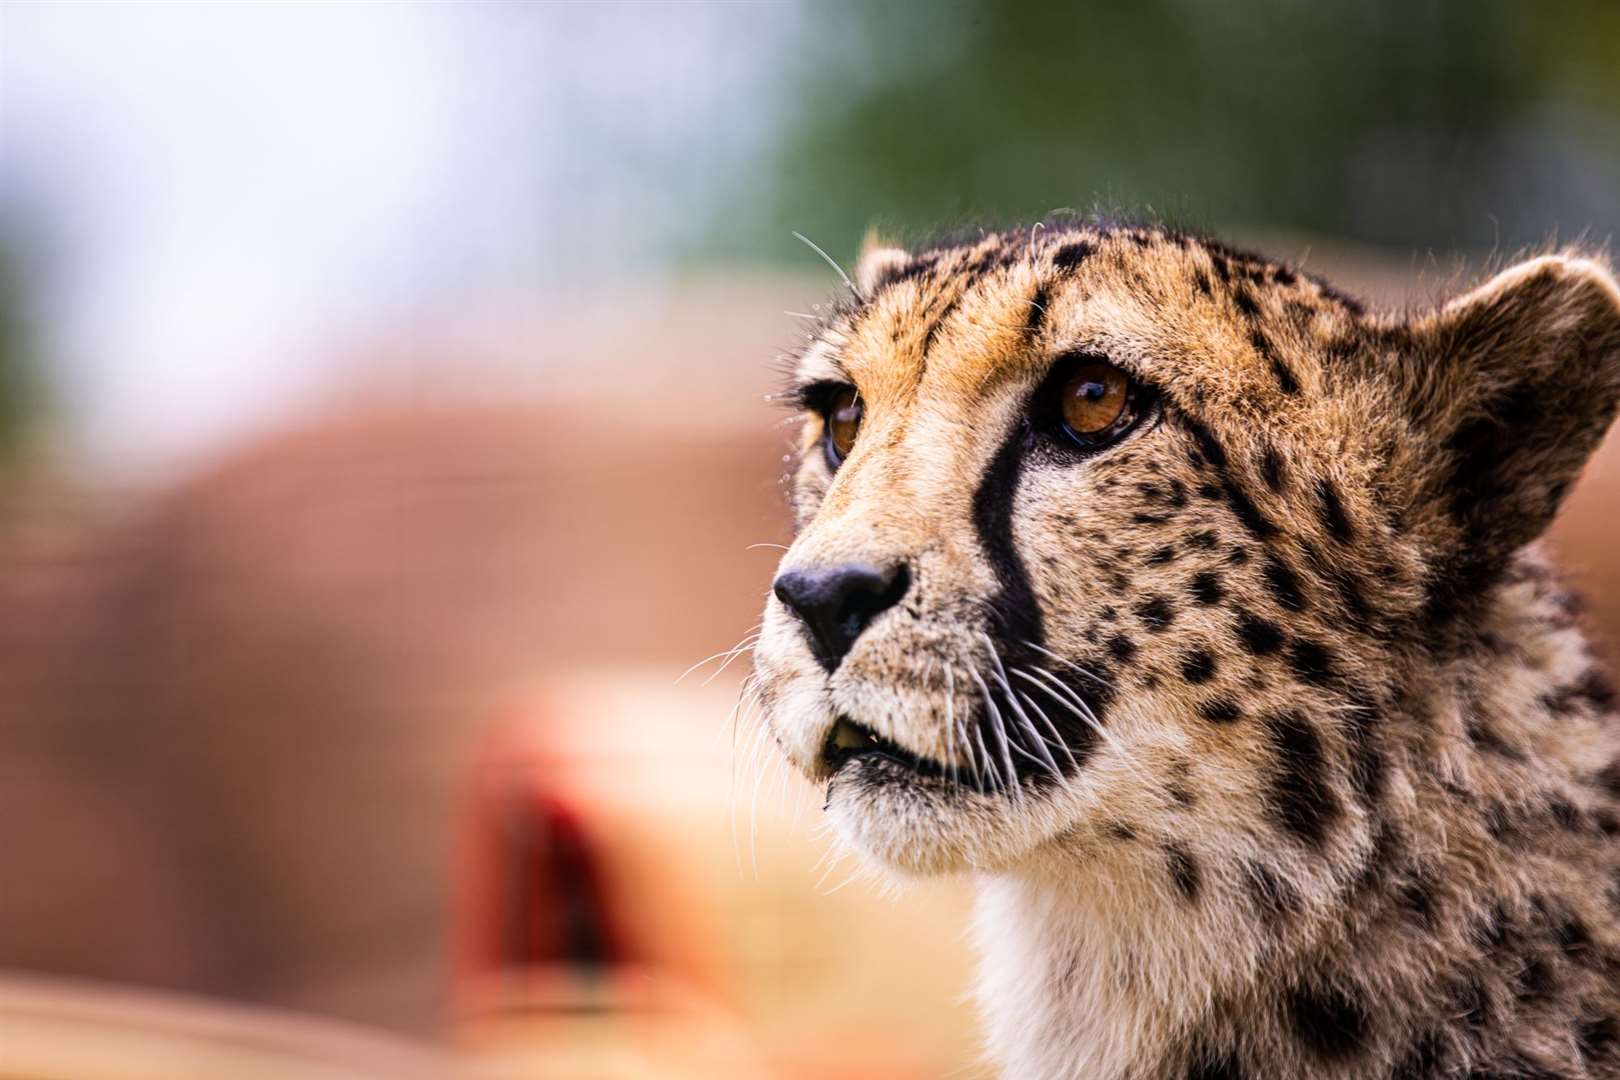 Entrants for the raffle could win an overnight stay at the Big Cat Sanctuary